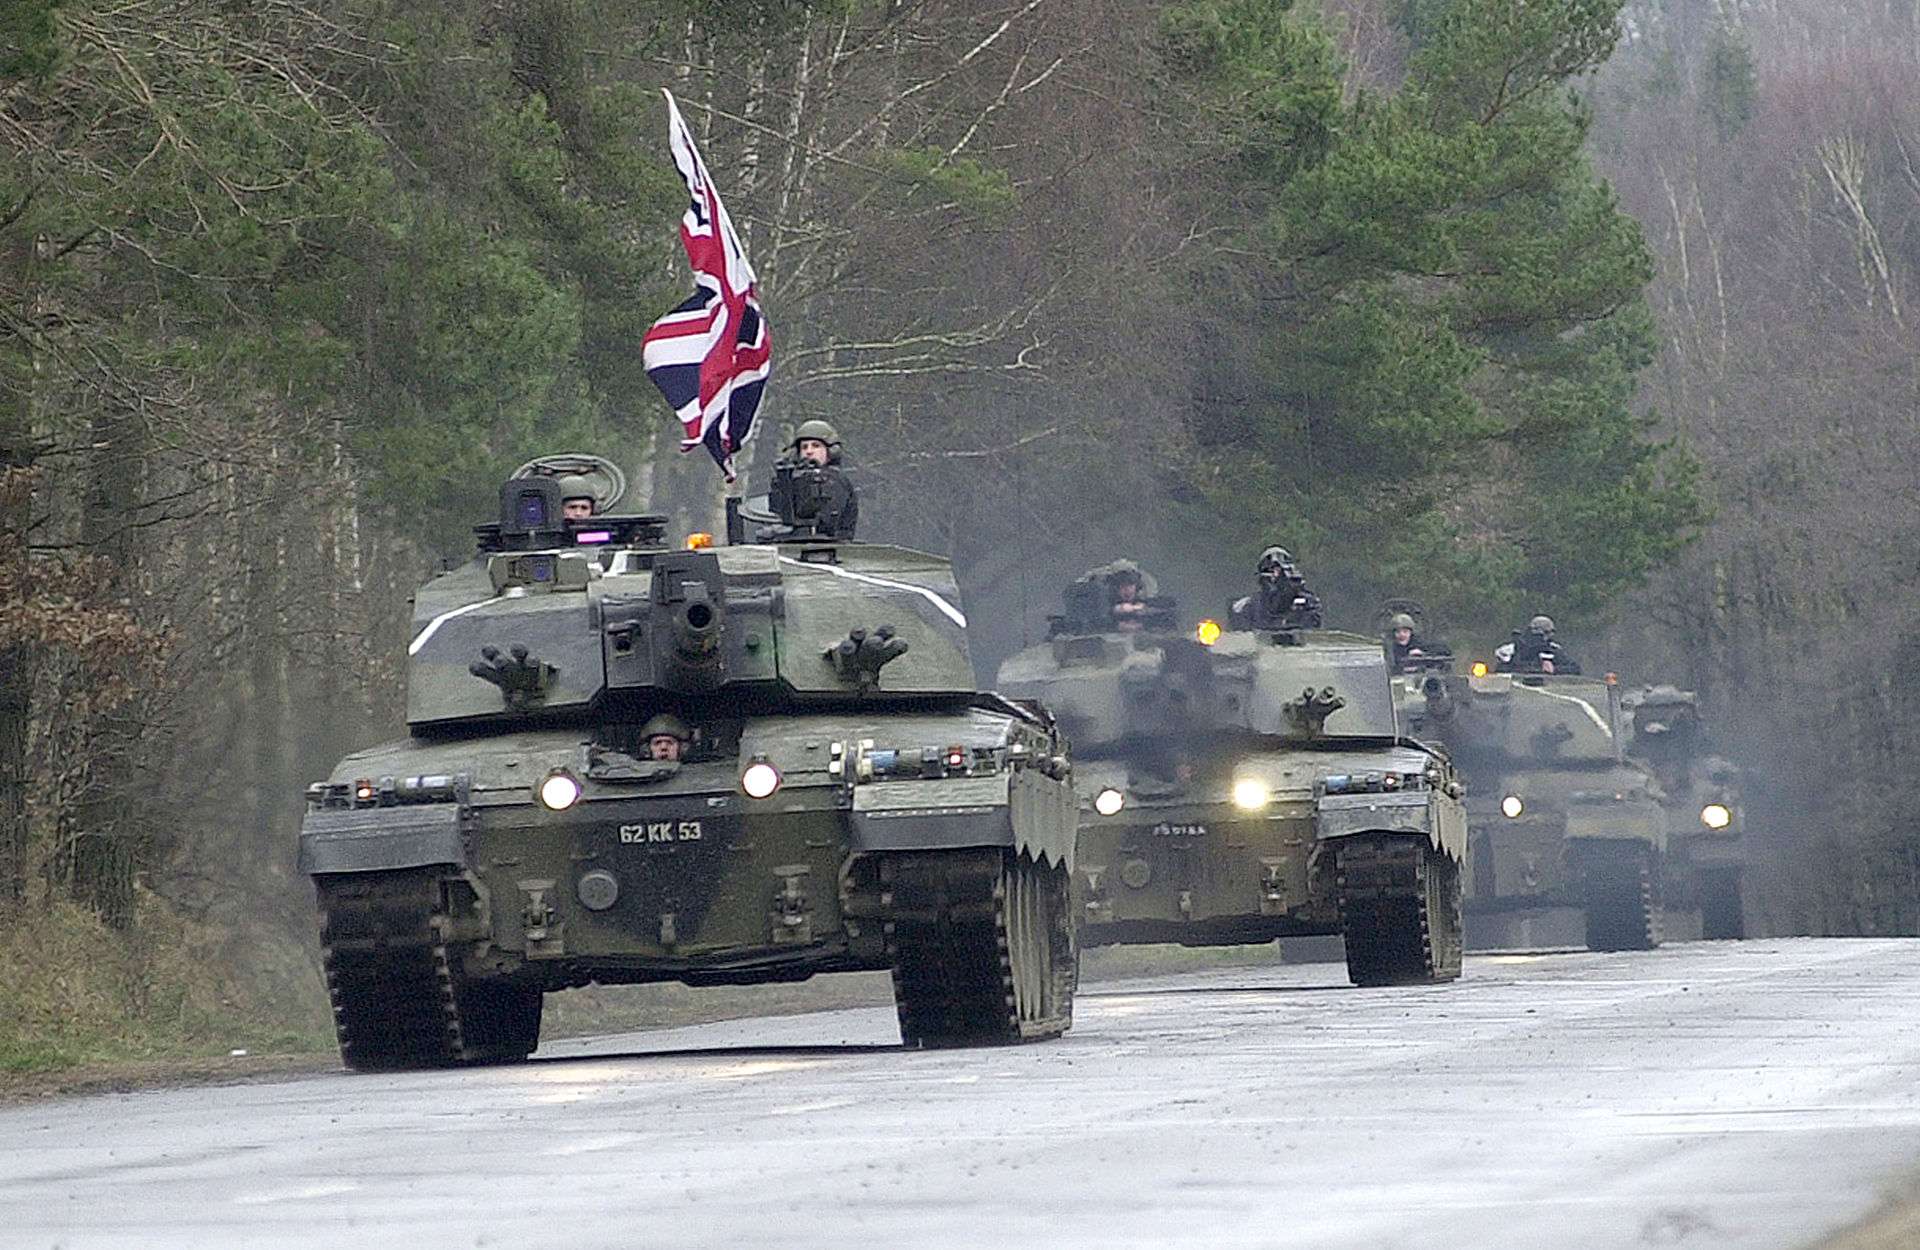 Challenger 2s driving in Germany.